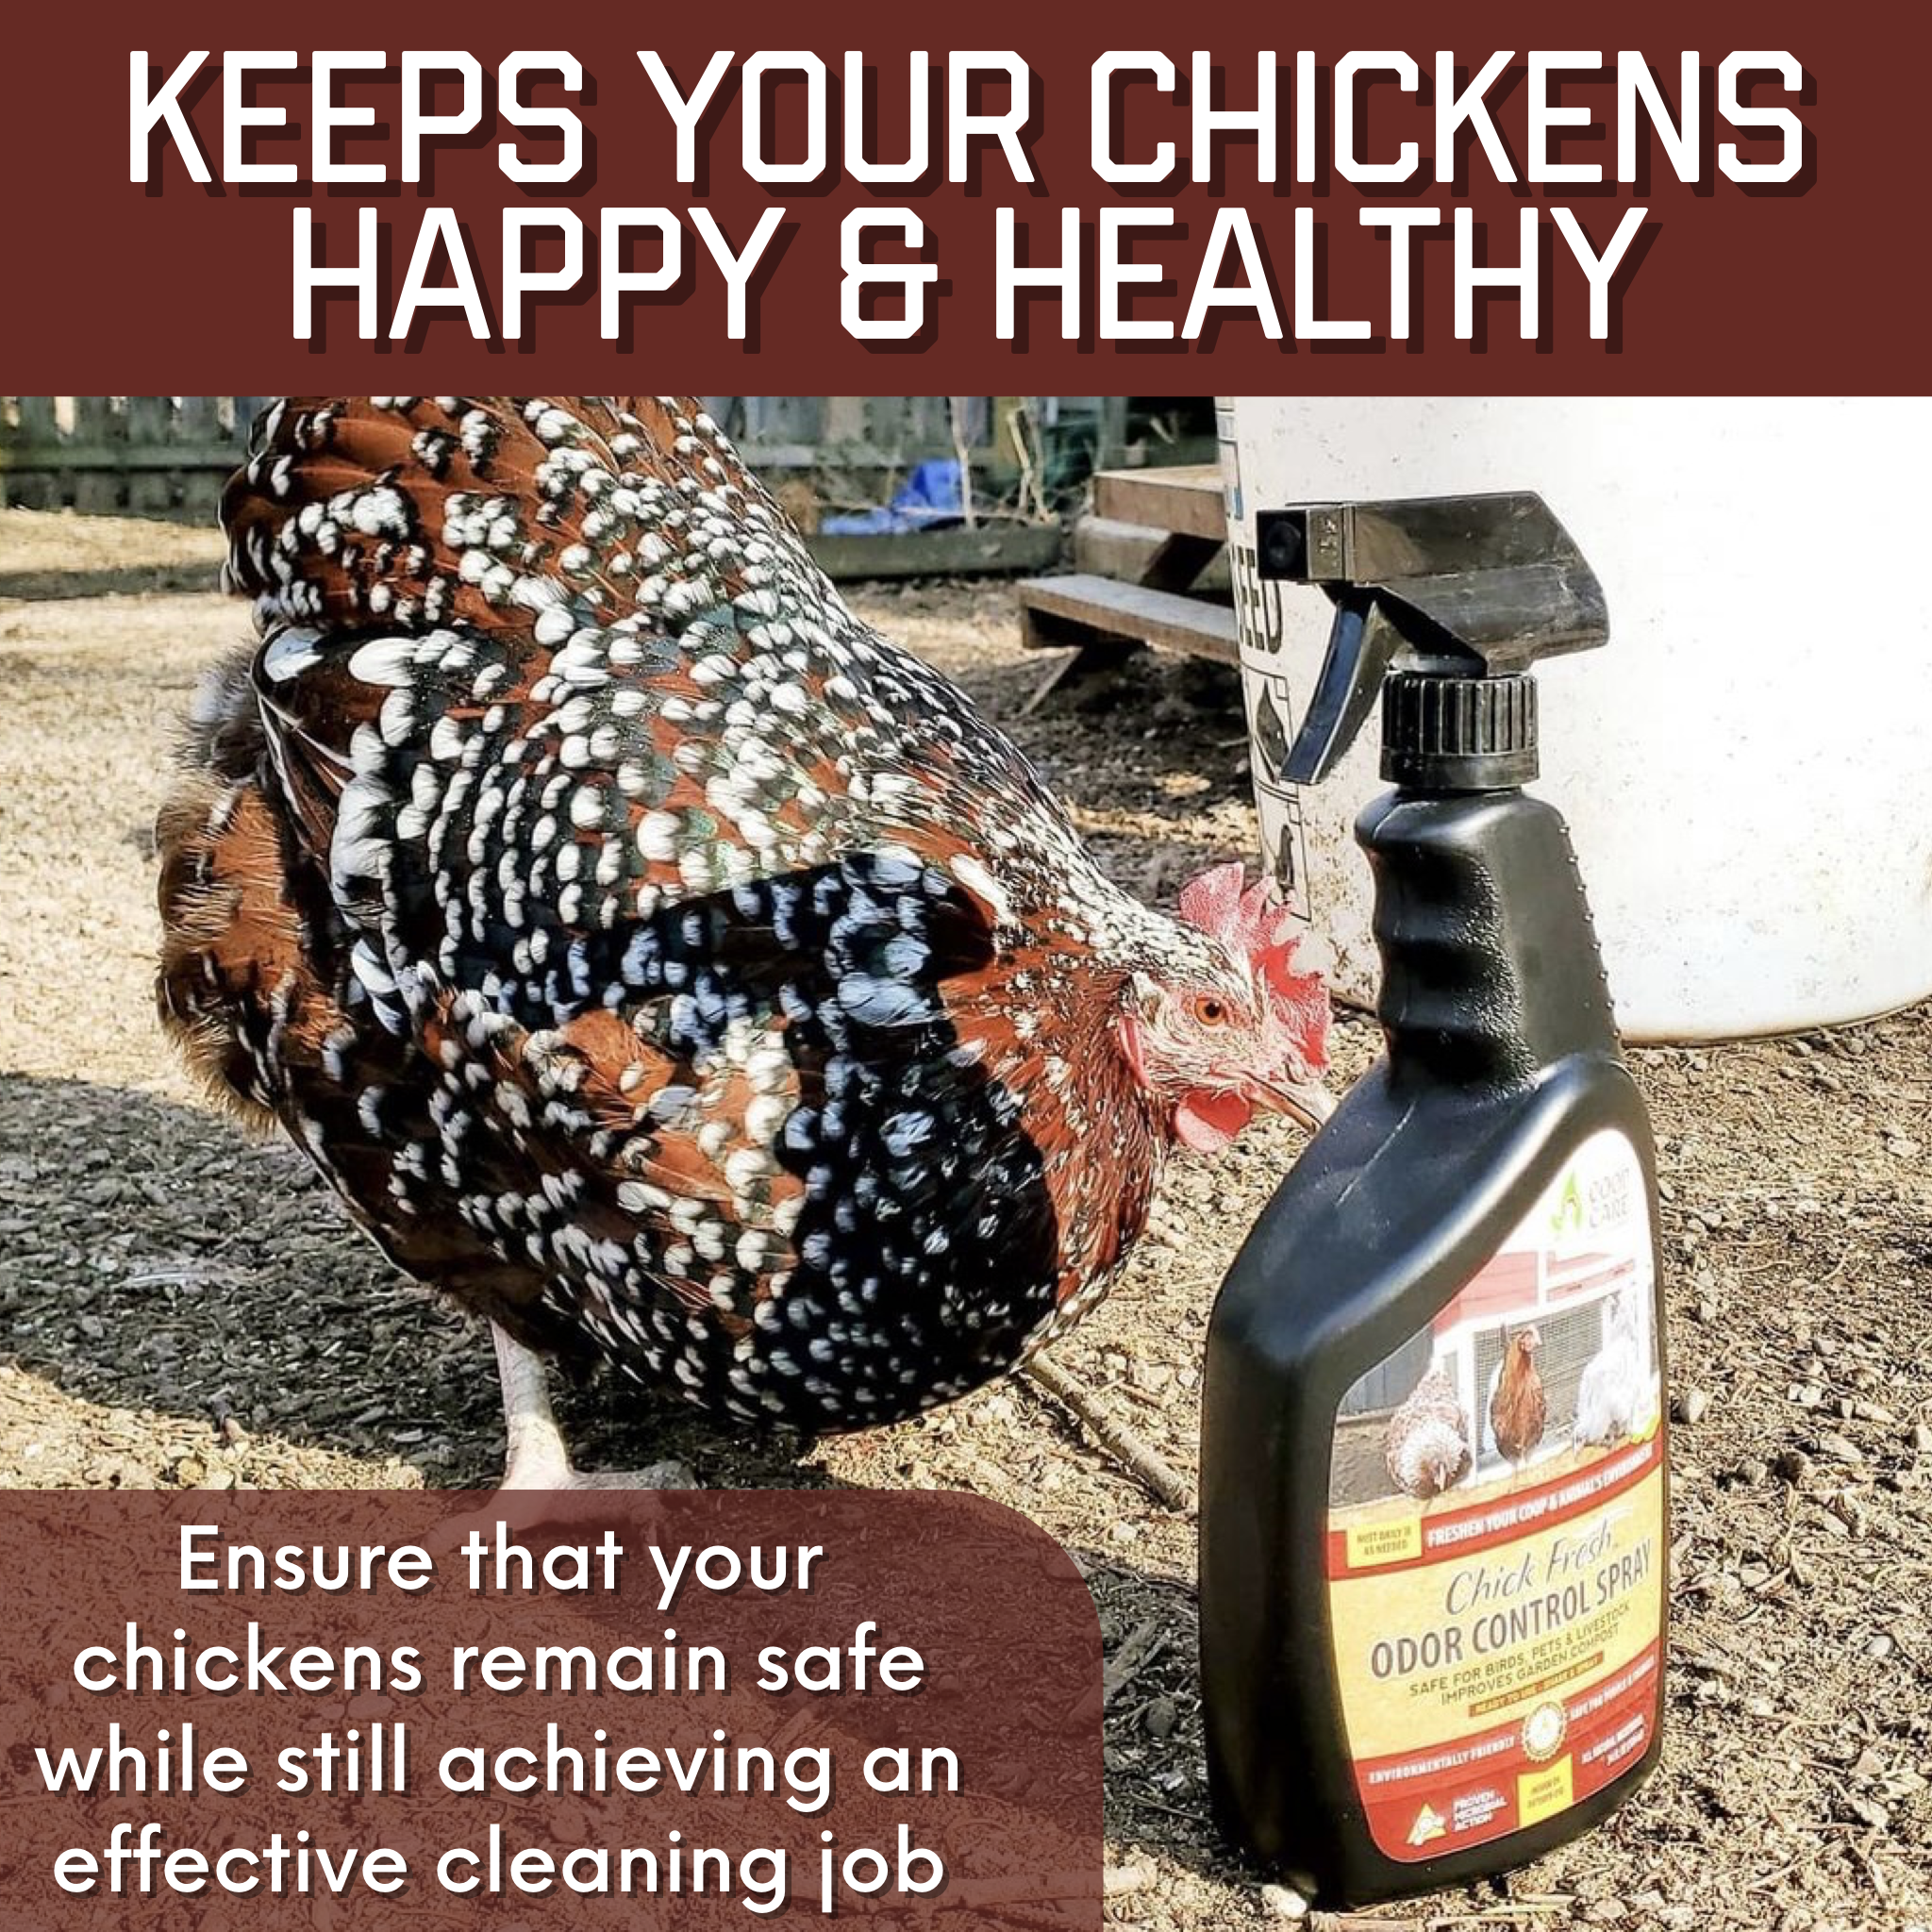 Chick Fresh - Eliminate Chicken Coop & Brooder Odor Concentrate (4 oz makes 1 Gallon of Spray!)